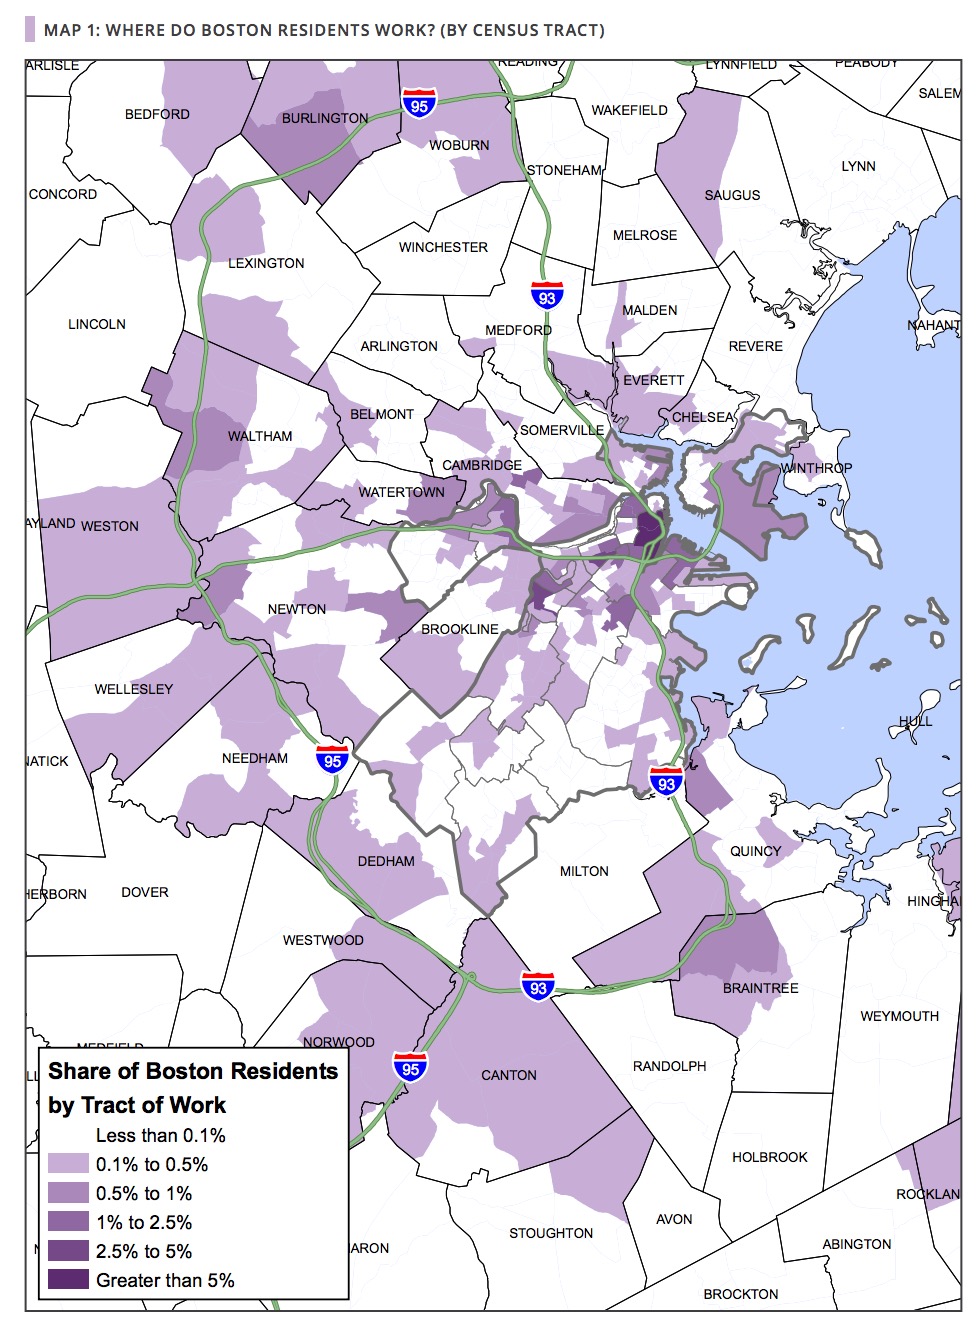 MAP 1: WHERE DO BOSTON RESIDENTS WORK? (BY CENSUS TRACT)